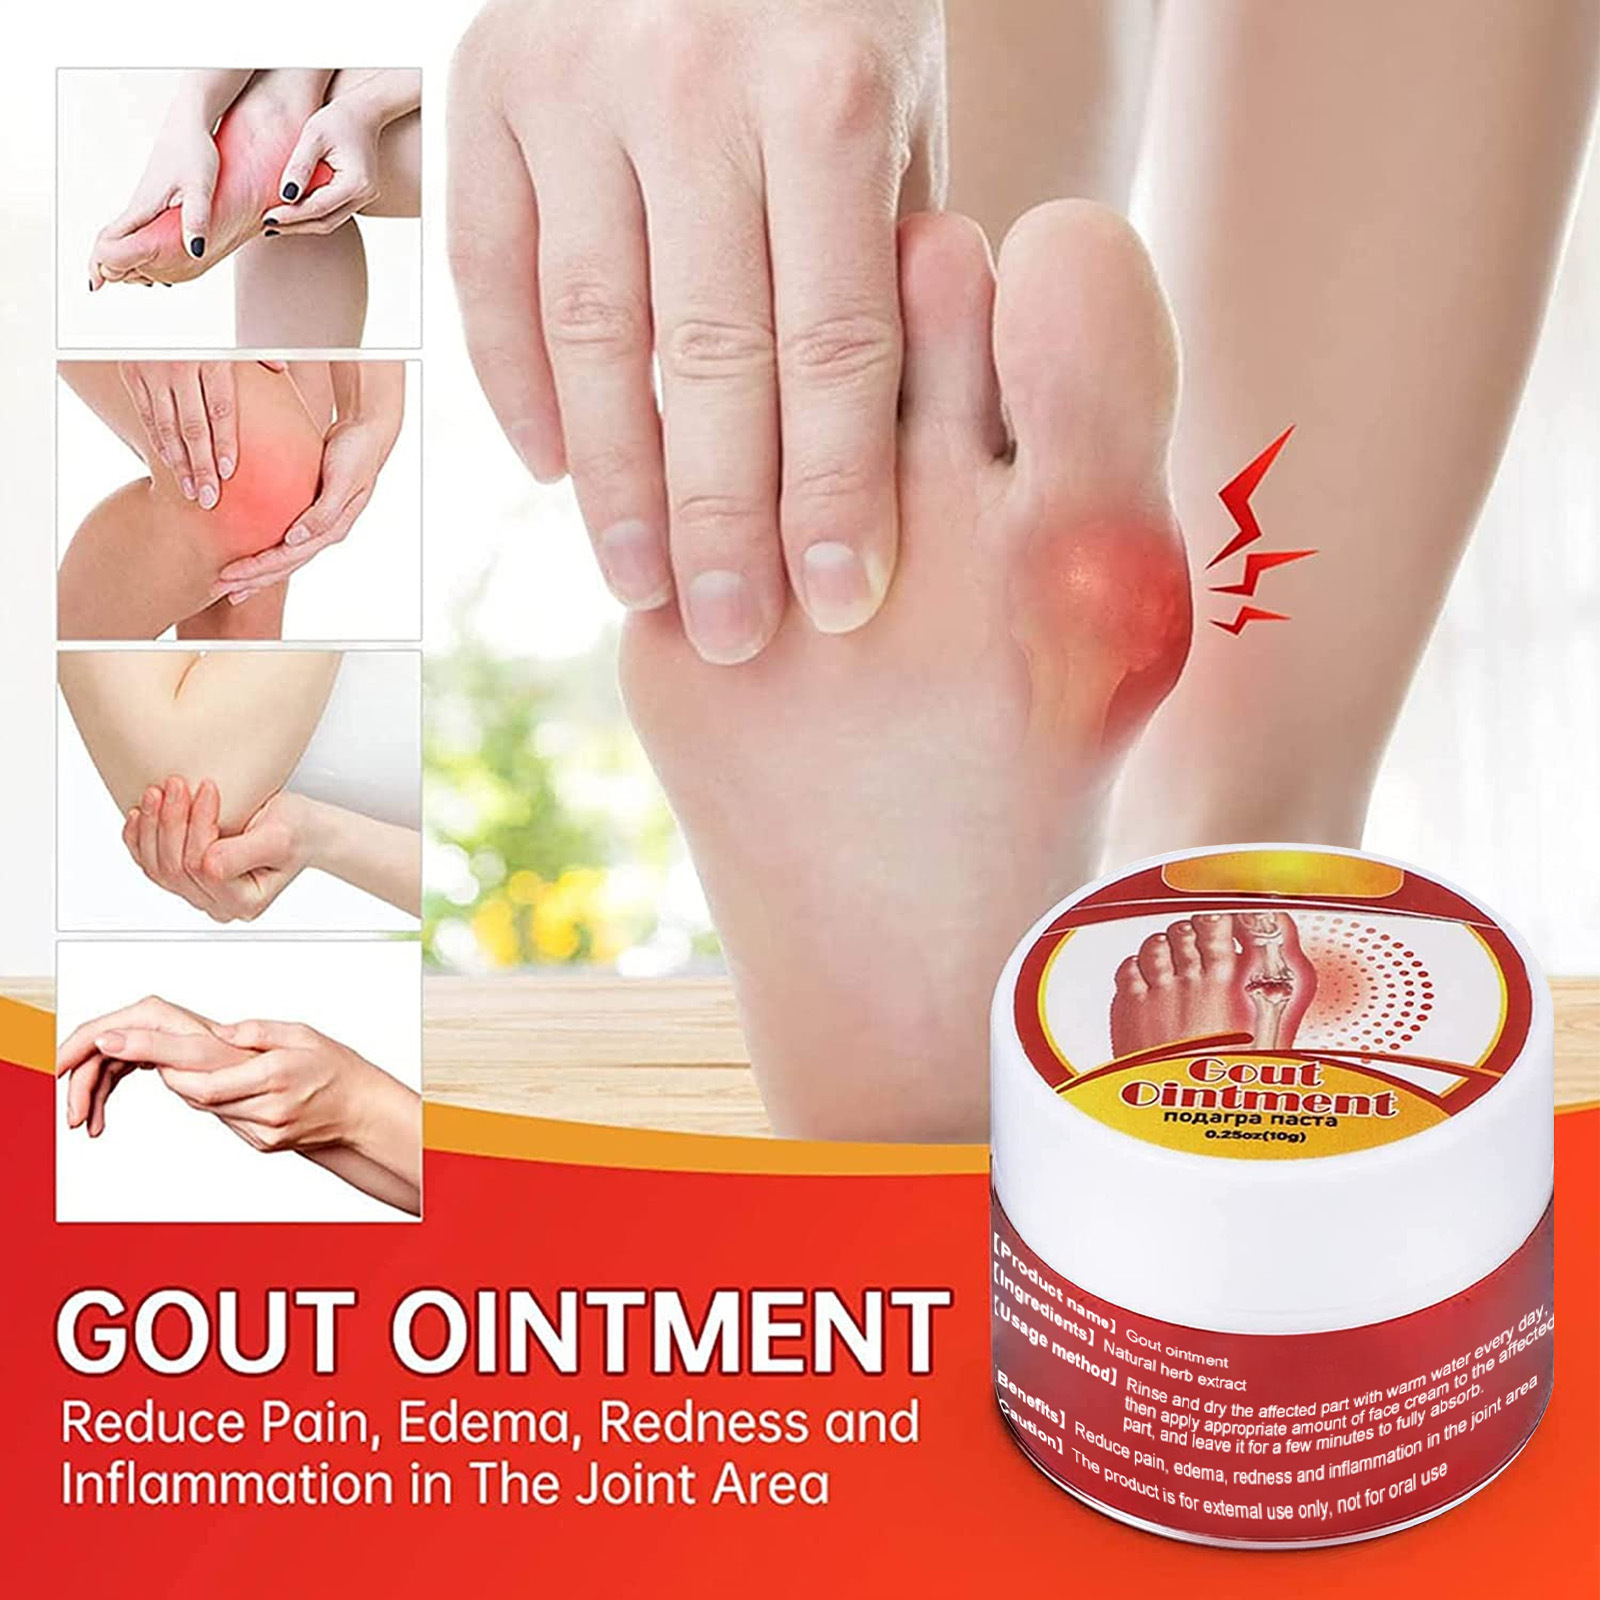 Ouhoe Joint Pain Ointment Activating Collaterals Muscles and Bones Thumb Ankle Joint Stiffness Pain Red Swelling Care Cream